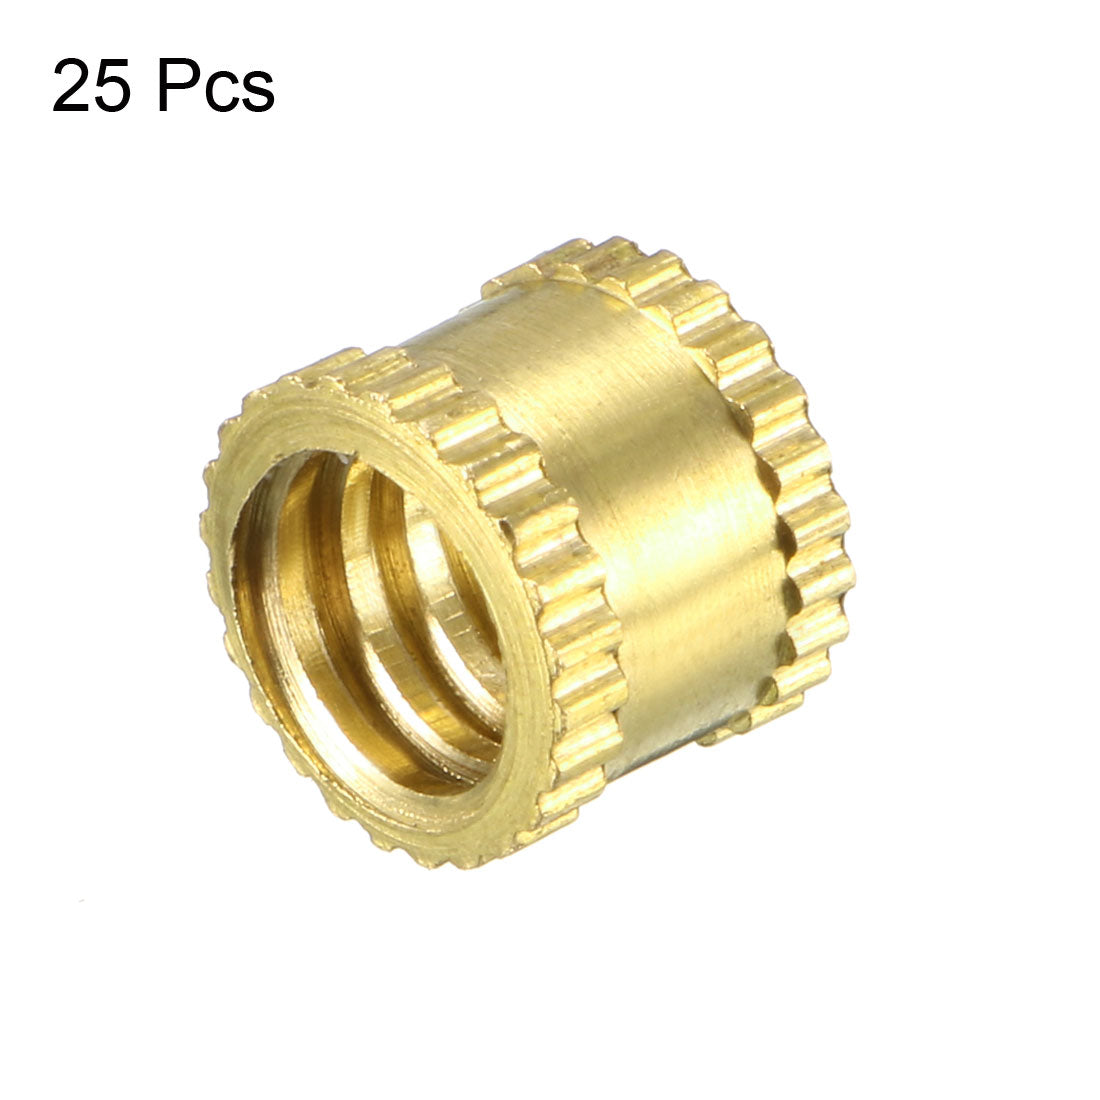 uxcell Uxcell 1/4"-20 Female Brass Knurled Threaded Insert Embedment Nut for 3D Printer, 25Pcs